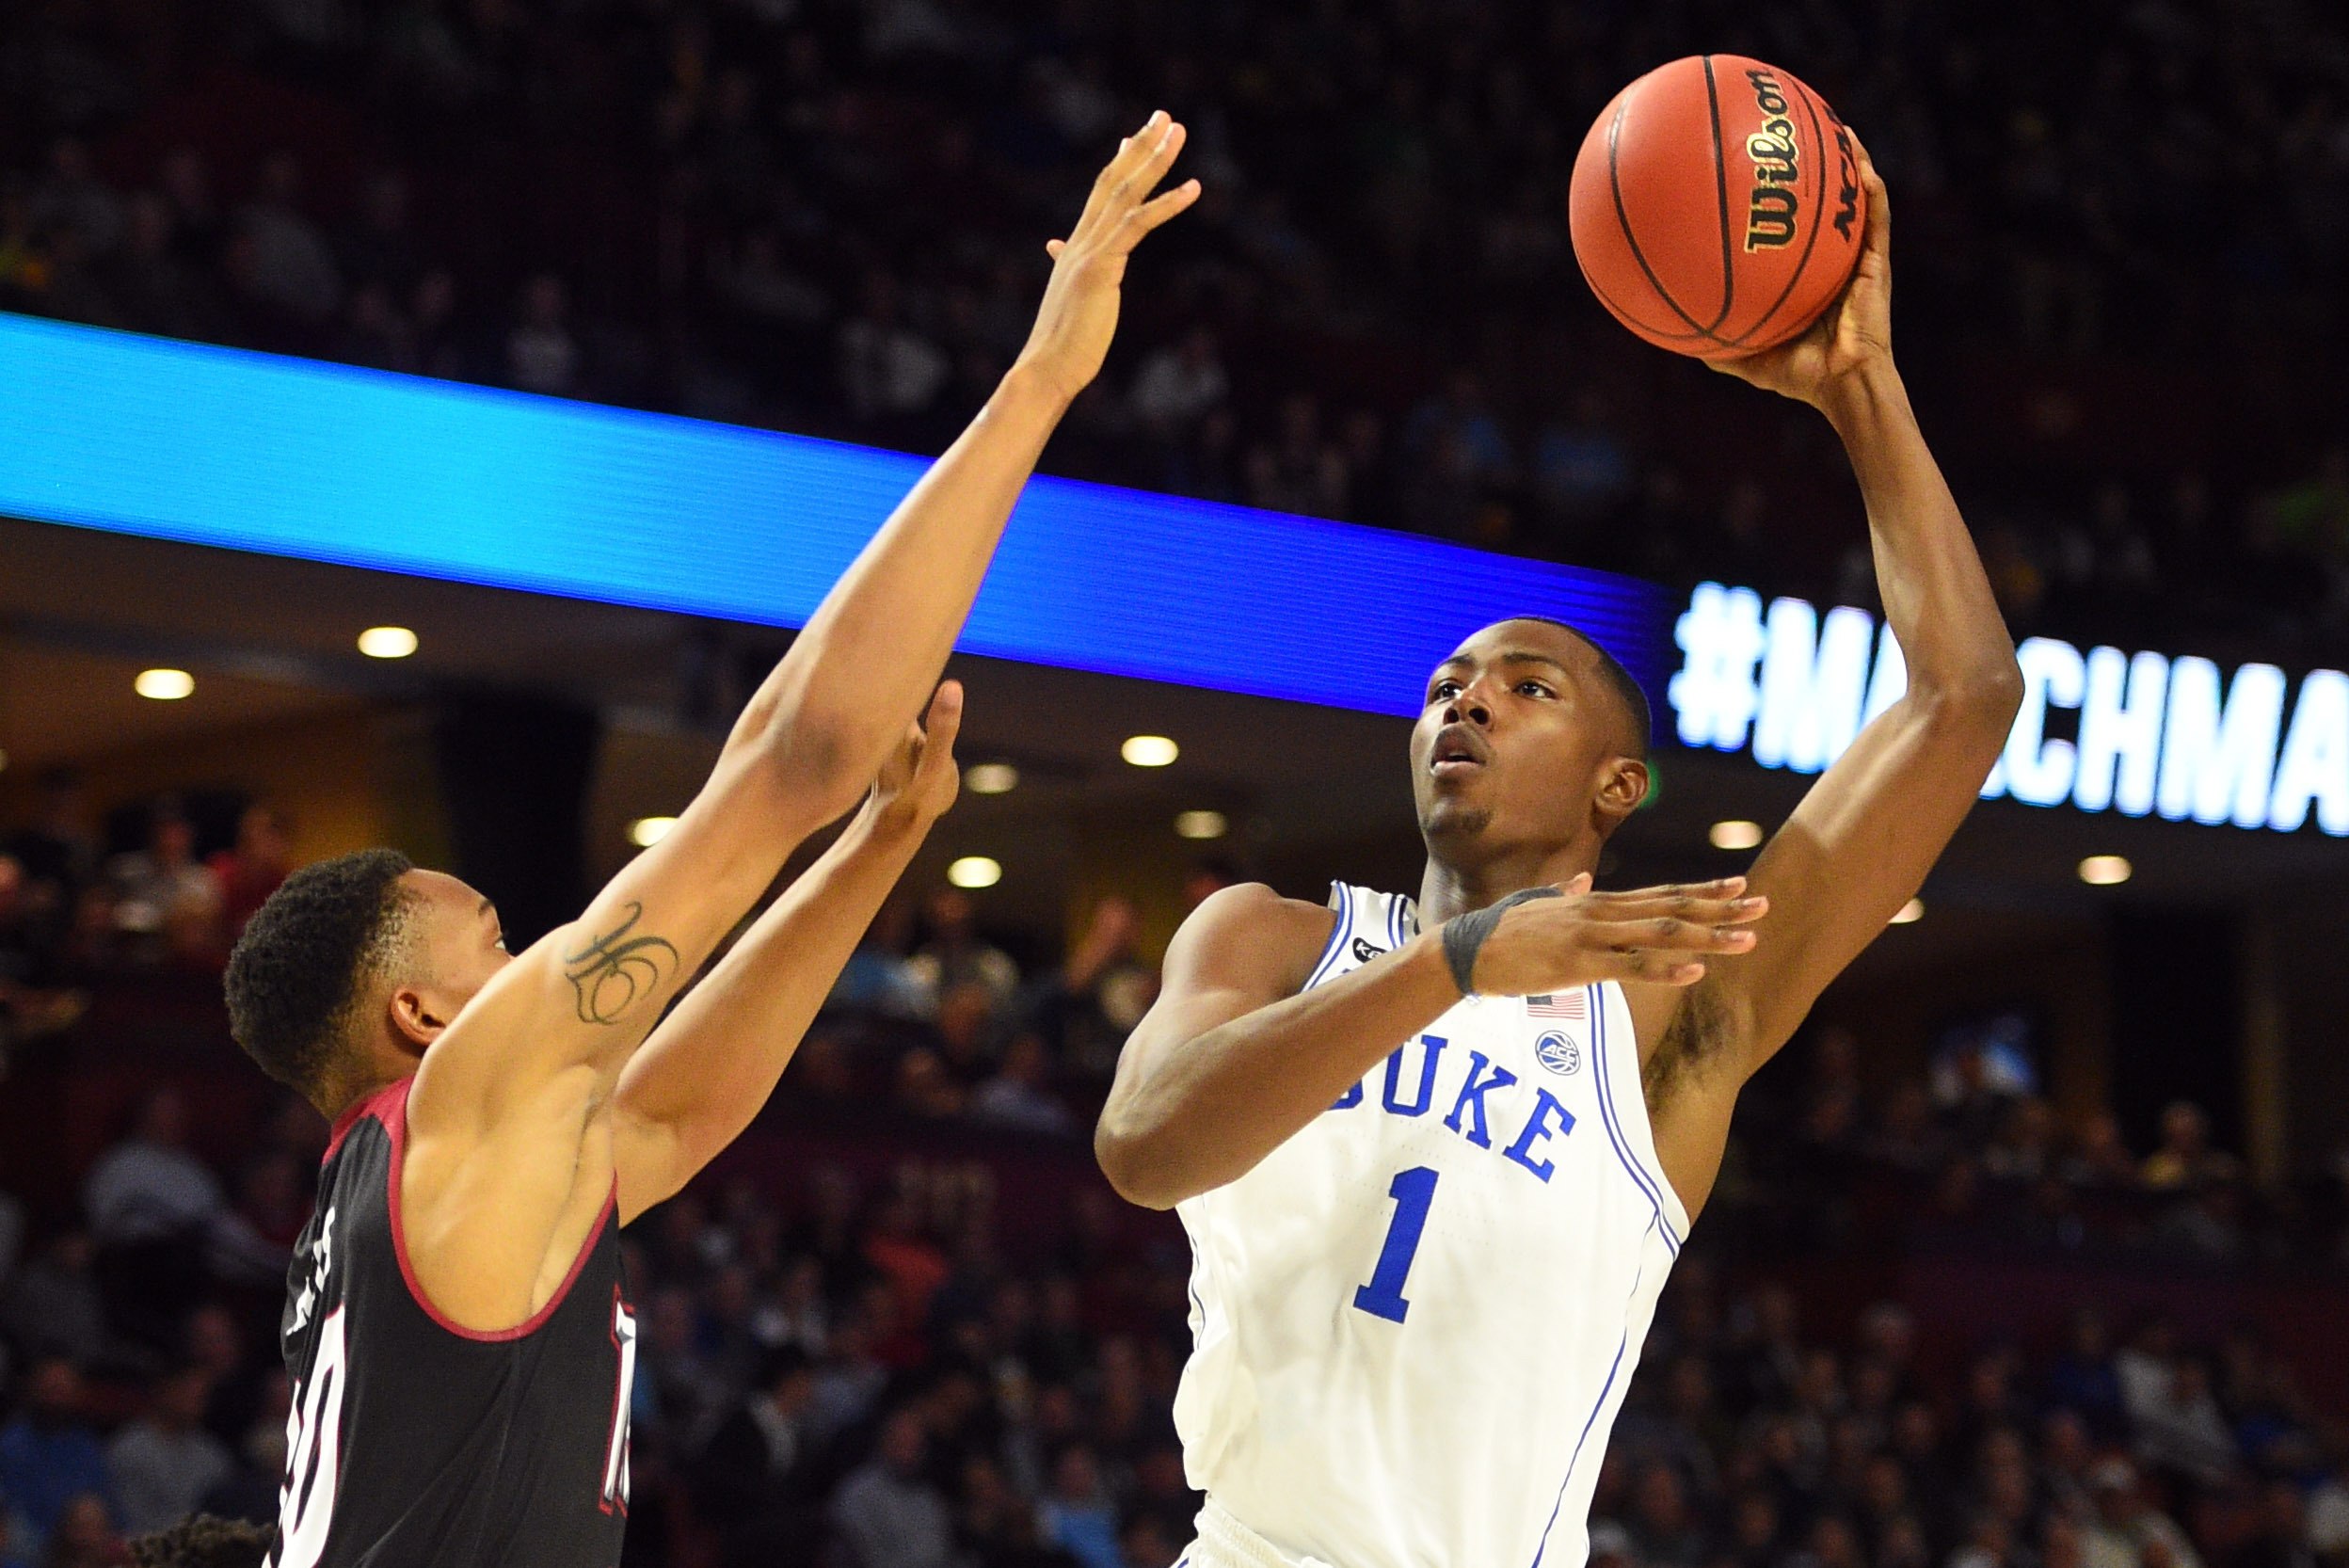 For Harry Giles III, the long road back just got shorter